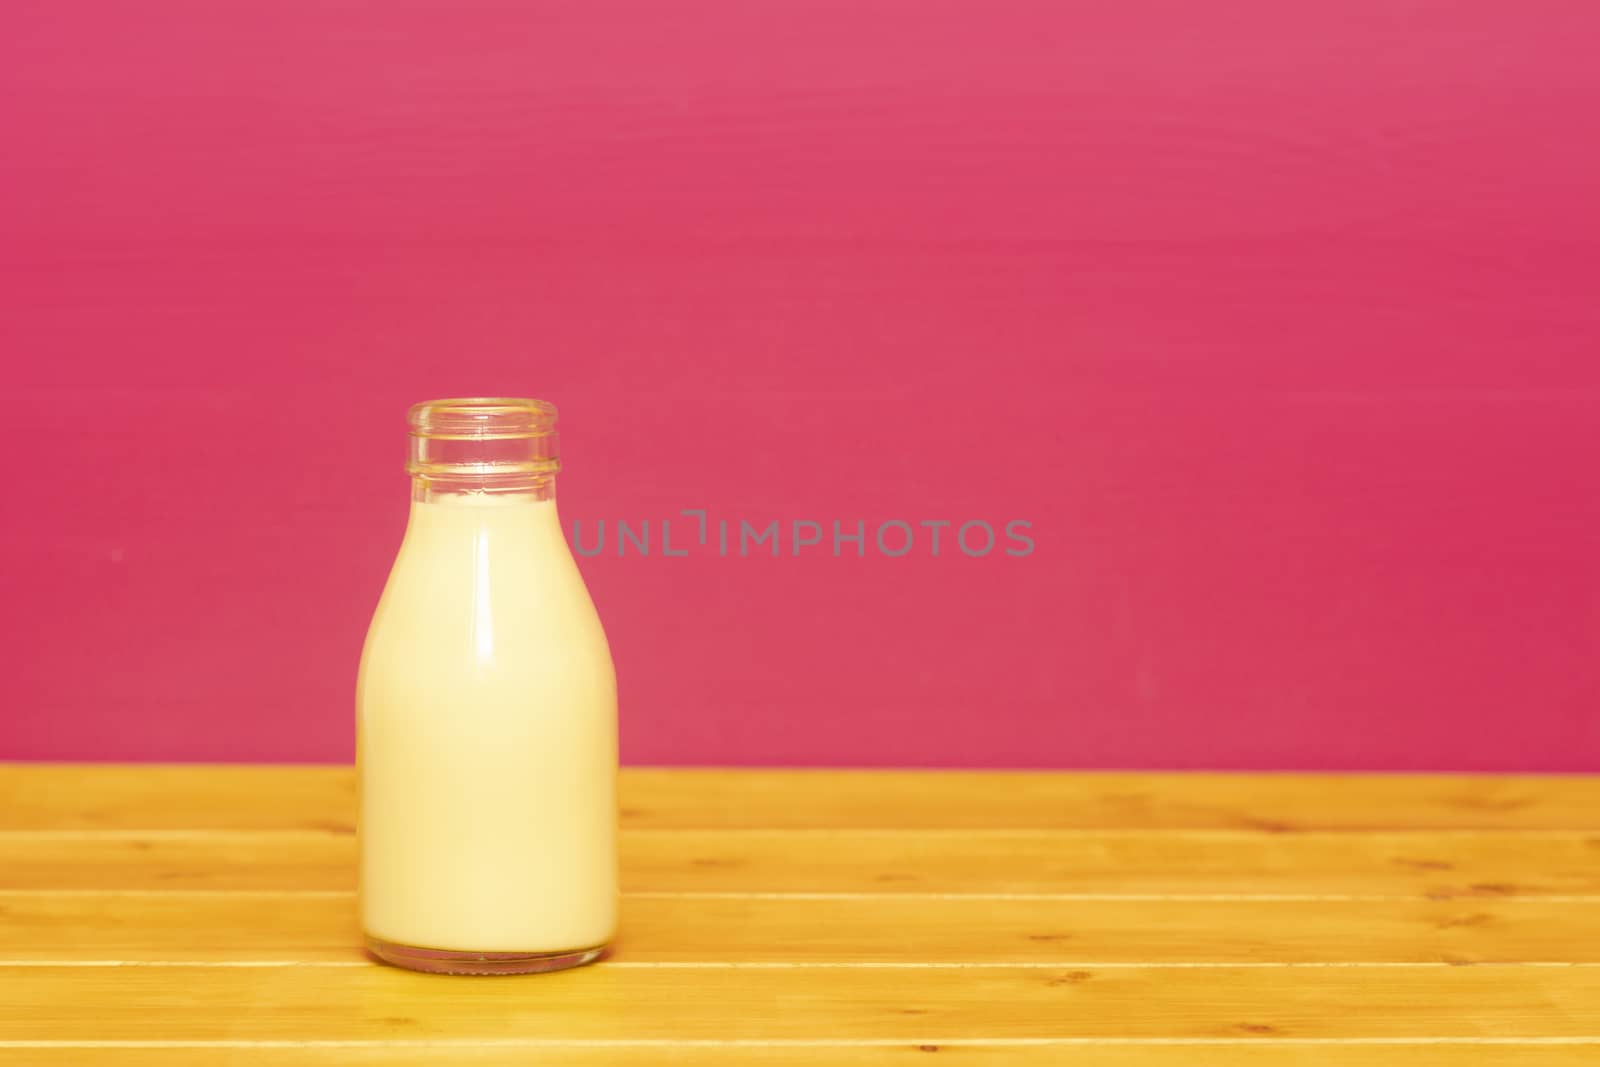 Banana milkshake in a one-third pint glass milk bottle, on a wooden table against a pink painted background